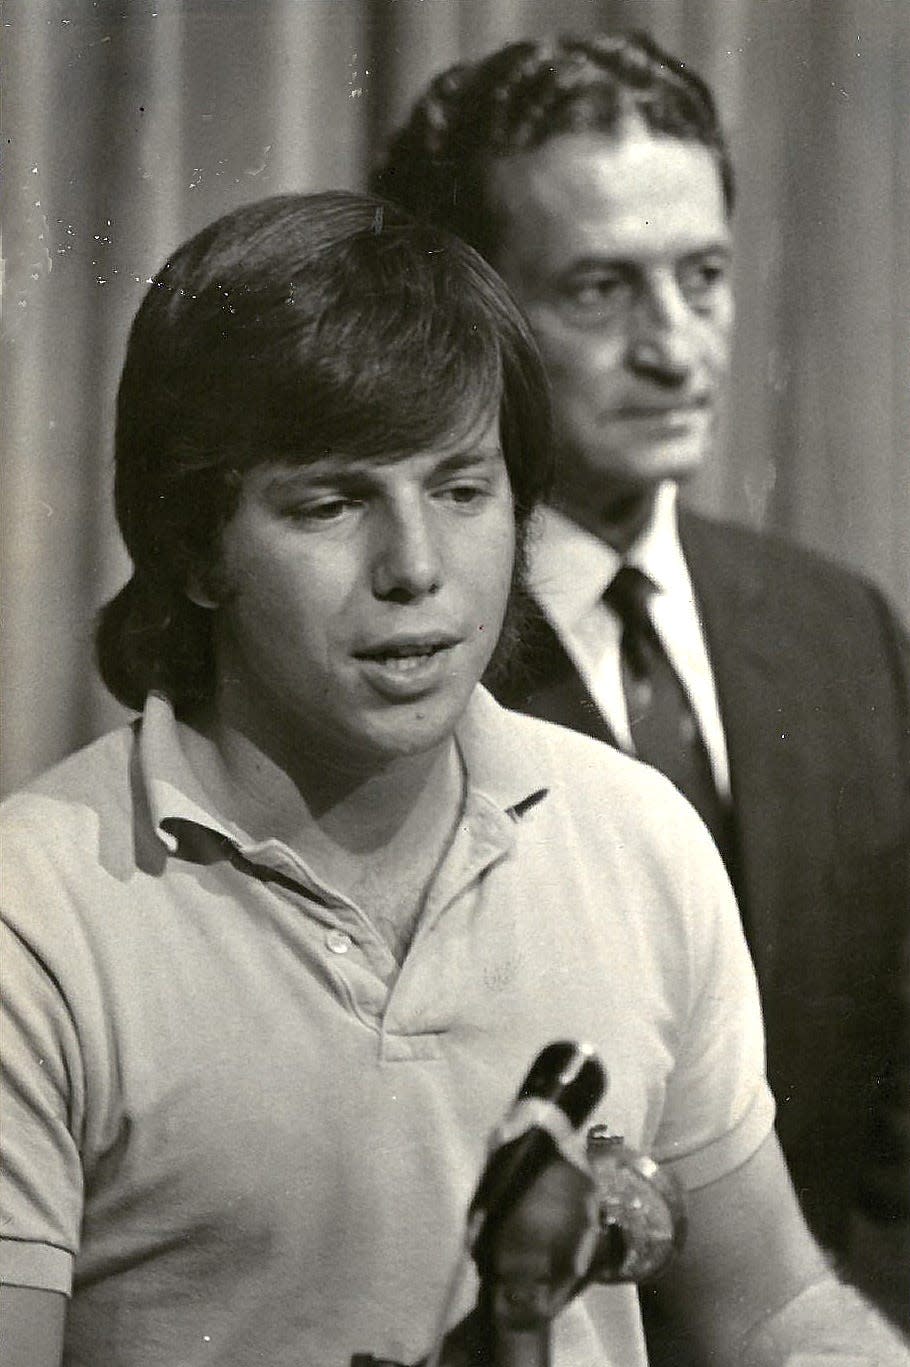 In this 1971 file photo, Ron Sachs, the former editor of the Florida Alligator, talks at a press conference after he is released from jail over publishing a list of abortion counseling services, which at the time was illegal. University of Florida president Stephen C. O'Connell is seen behind Sachs at the press conference. This incident and other issues over censorship caused a riff between the school newspaper and UF which ultimately lead the a split between the two. The newspaper later became the Independent Florida Alligator.